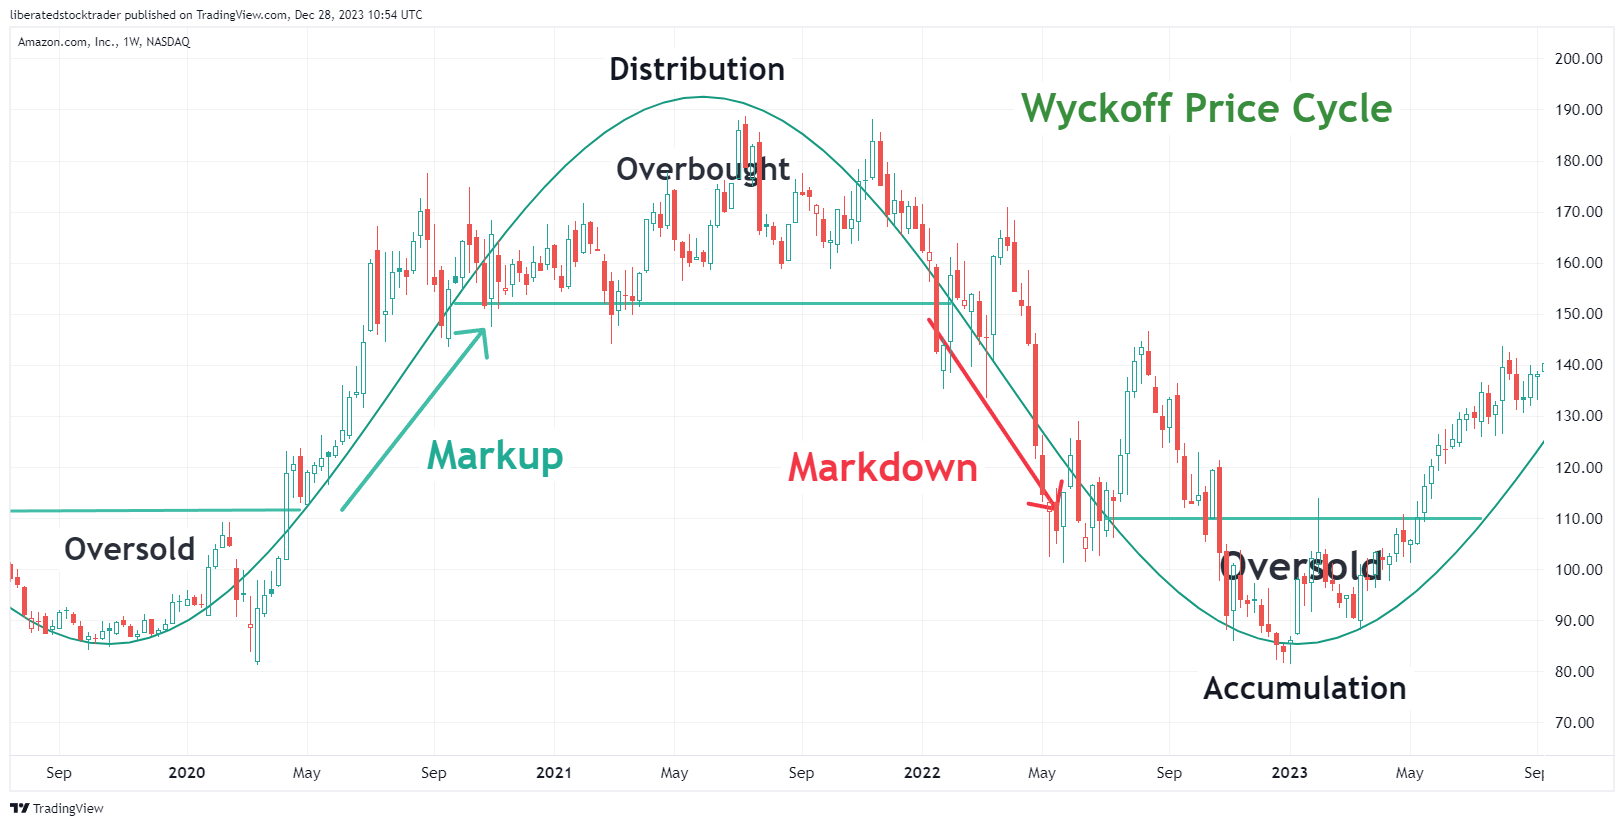 Wyckoff Phases Example: Accumulation, Distribution, Markup, Markdown, Overbought, and Oversold.